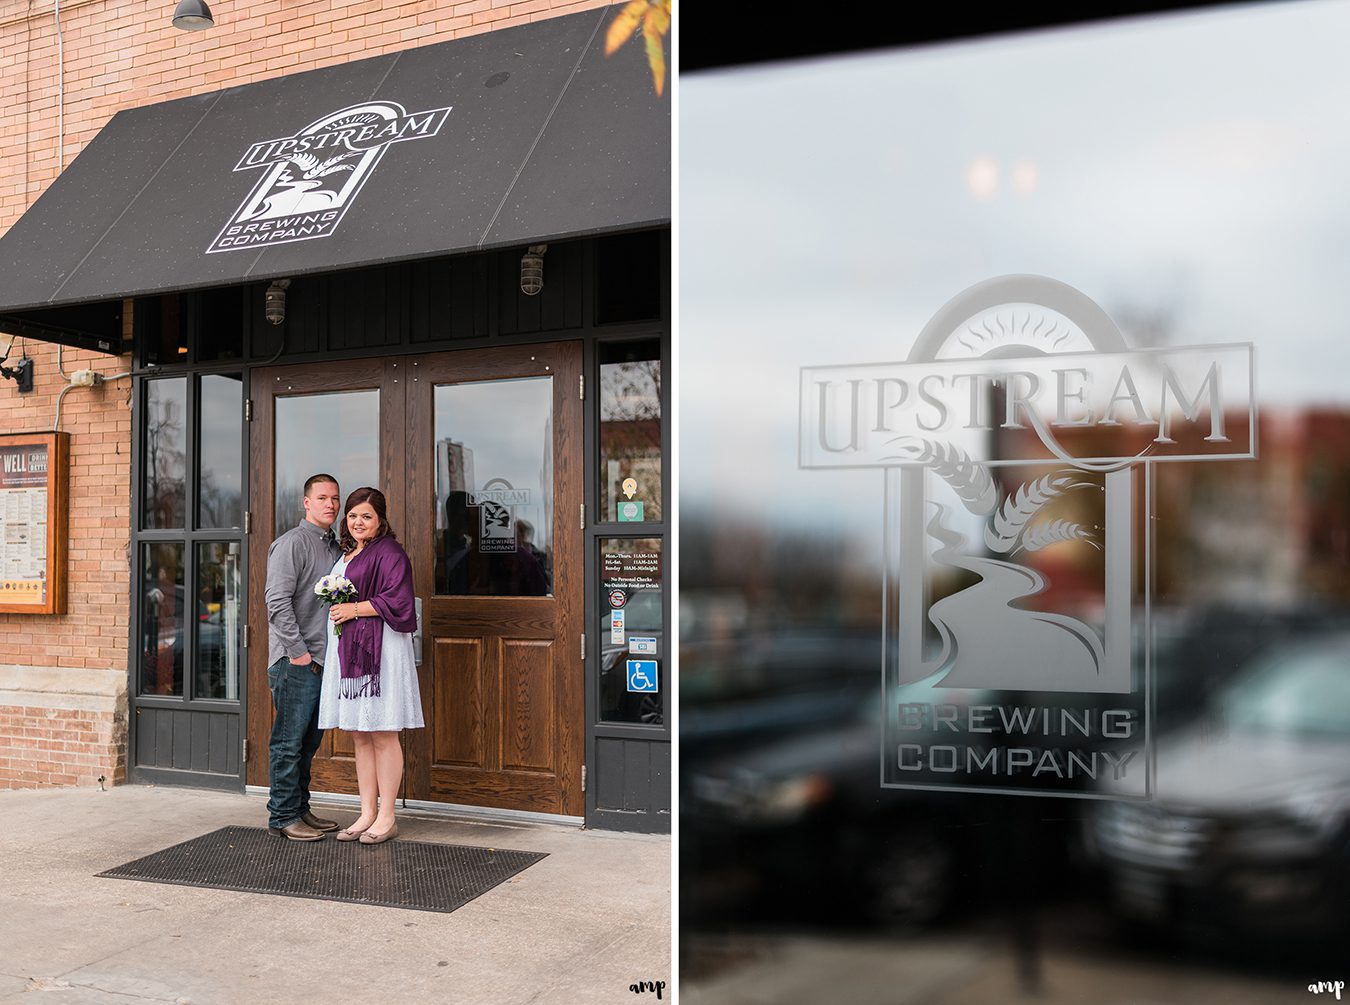 Couple outside Upstream Brewery in Old Market Omaha